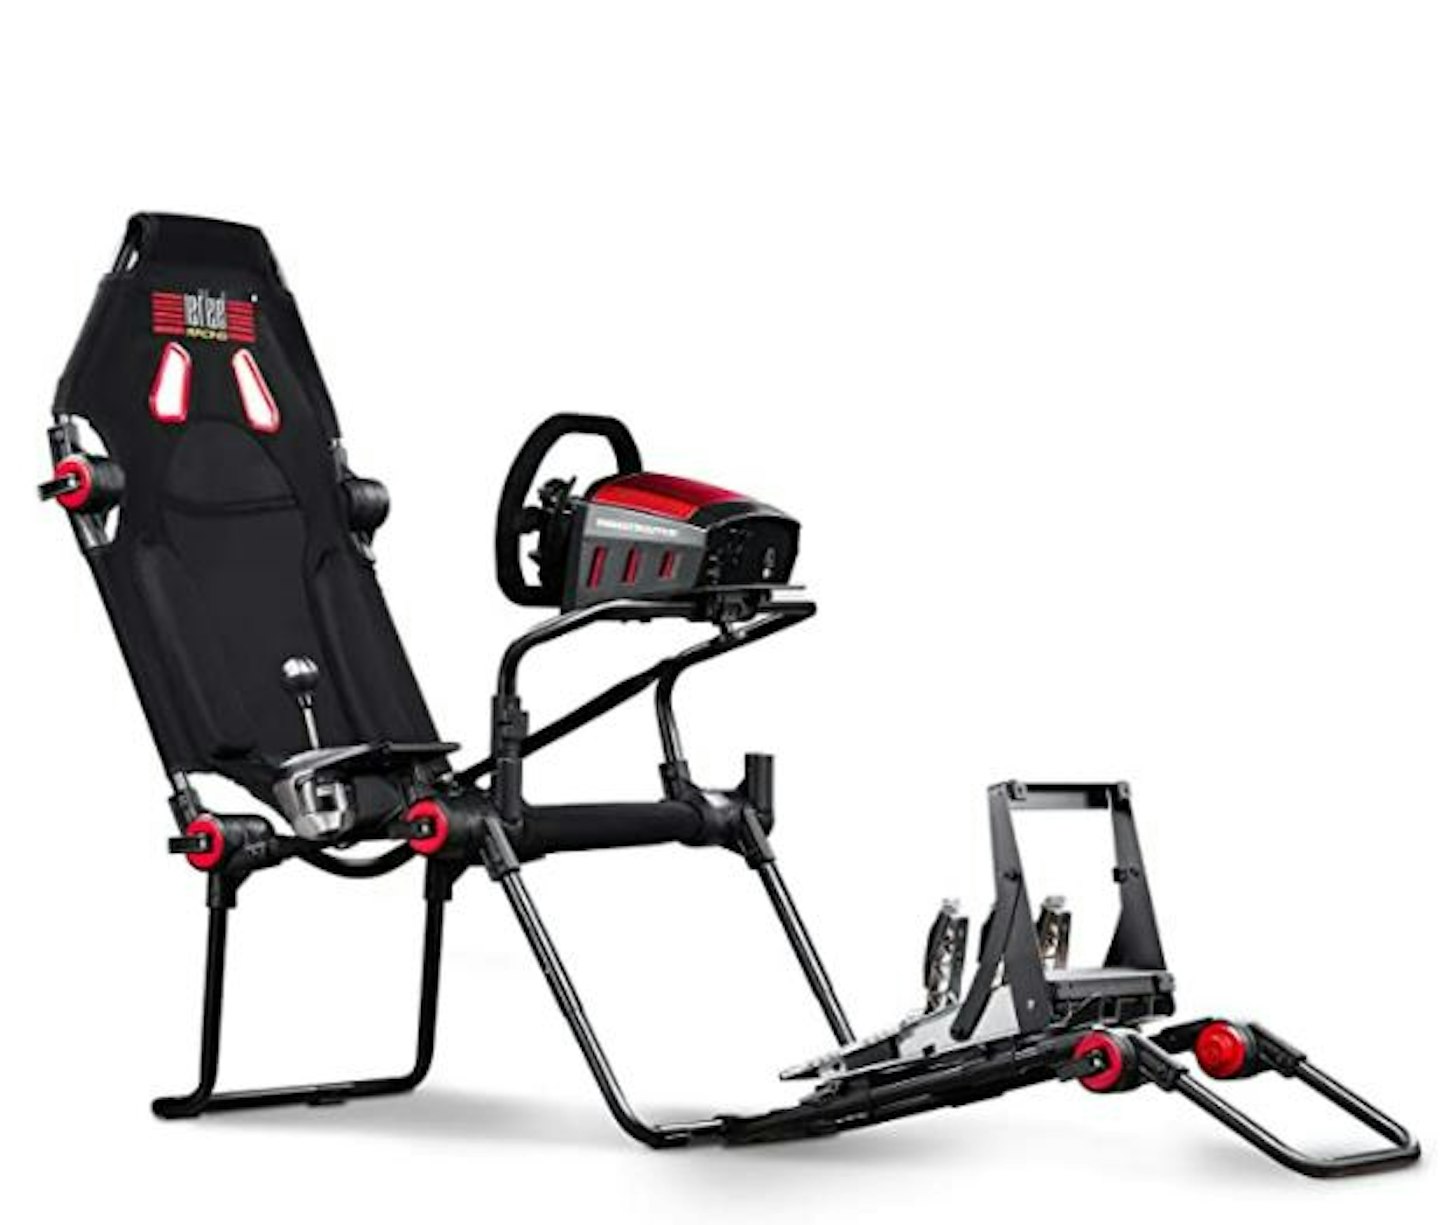 Next Level Racing F-GT Lite gaming seat review | Car Accessories 